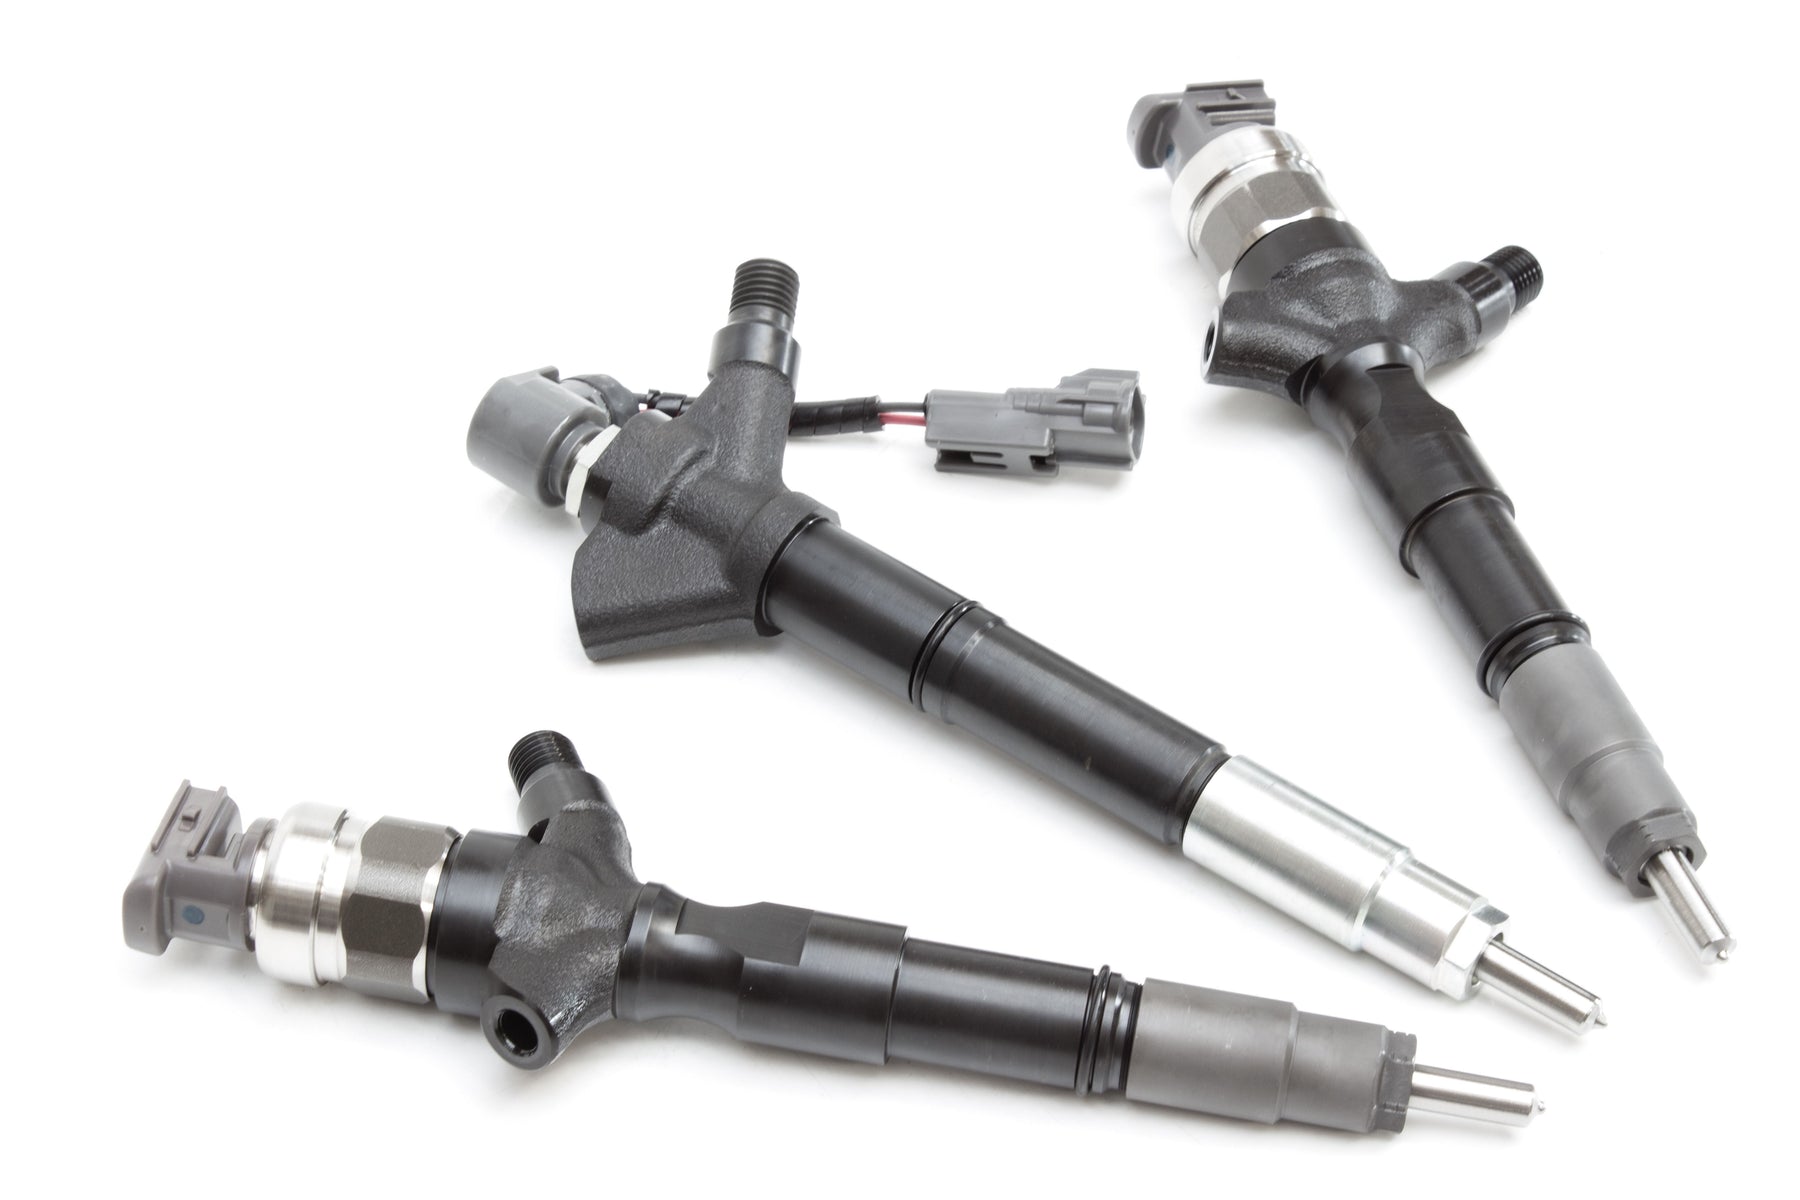 Ford Power Stroke Injector Innovations That Changed the Game